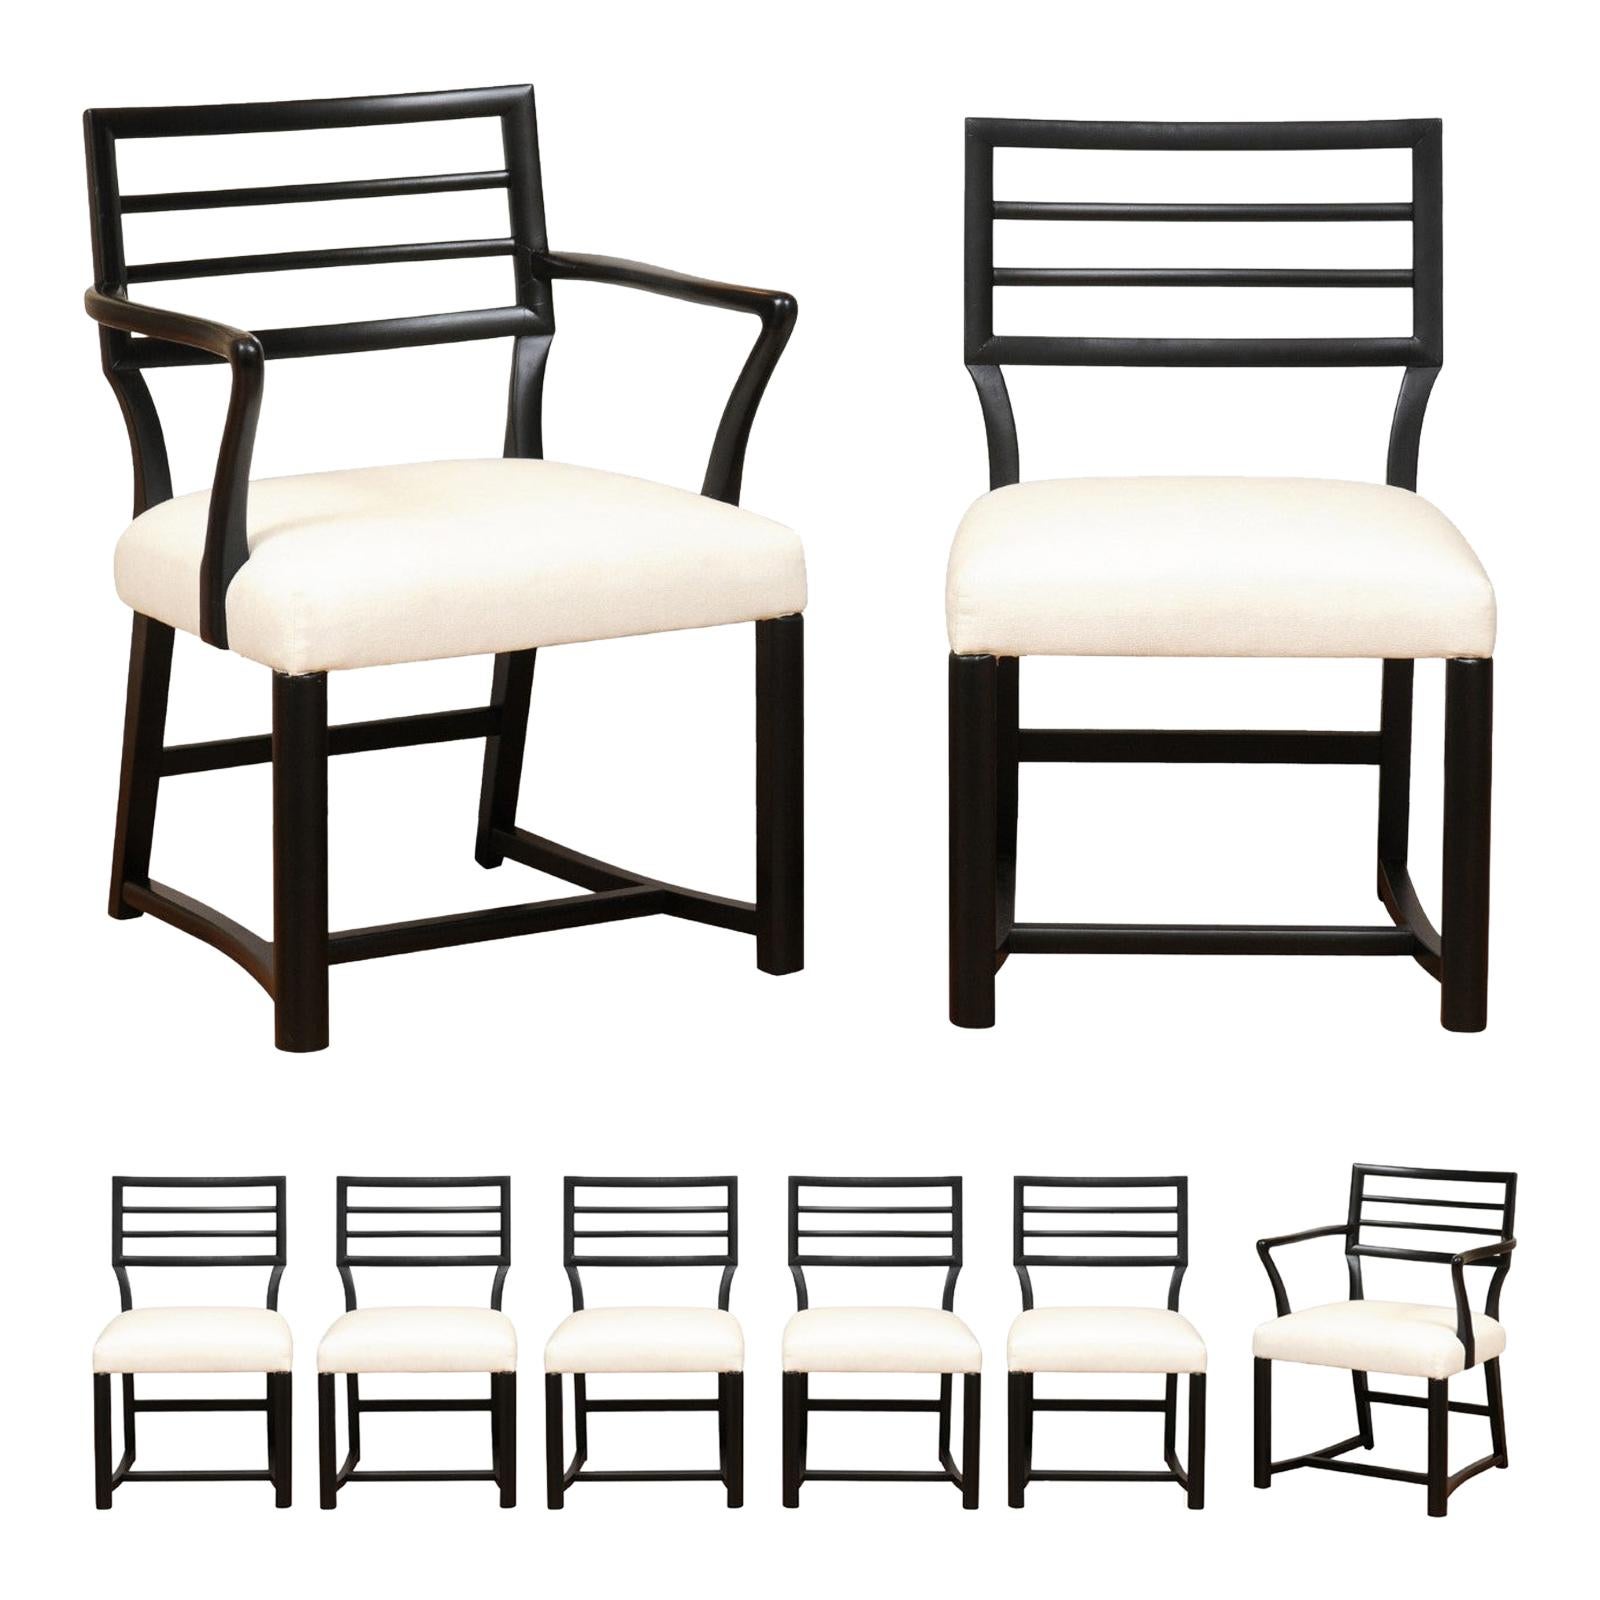 Spectacular Restored Set of 8 Modern Dining Chairs by Michael Taylor, circa 1957 For Sale